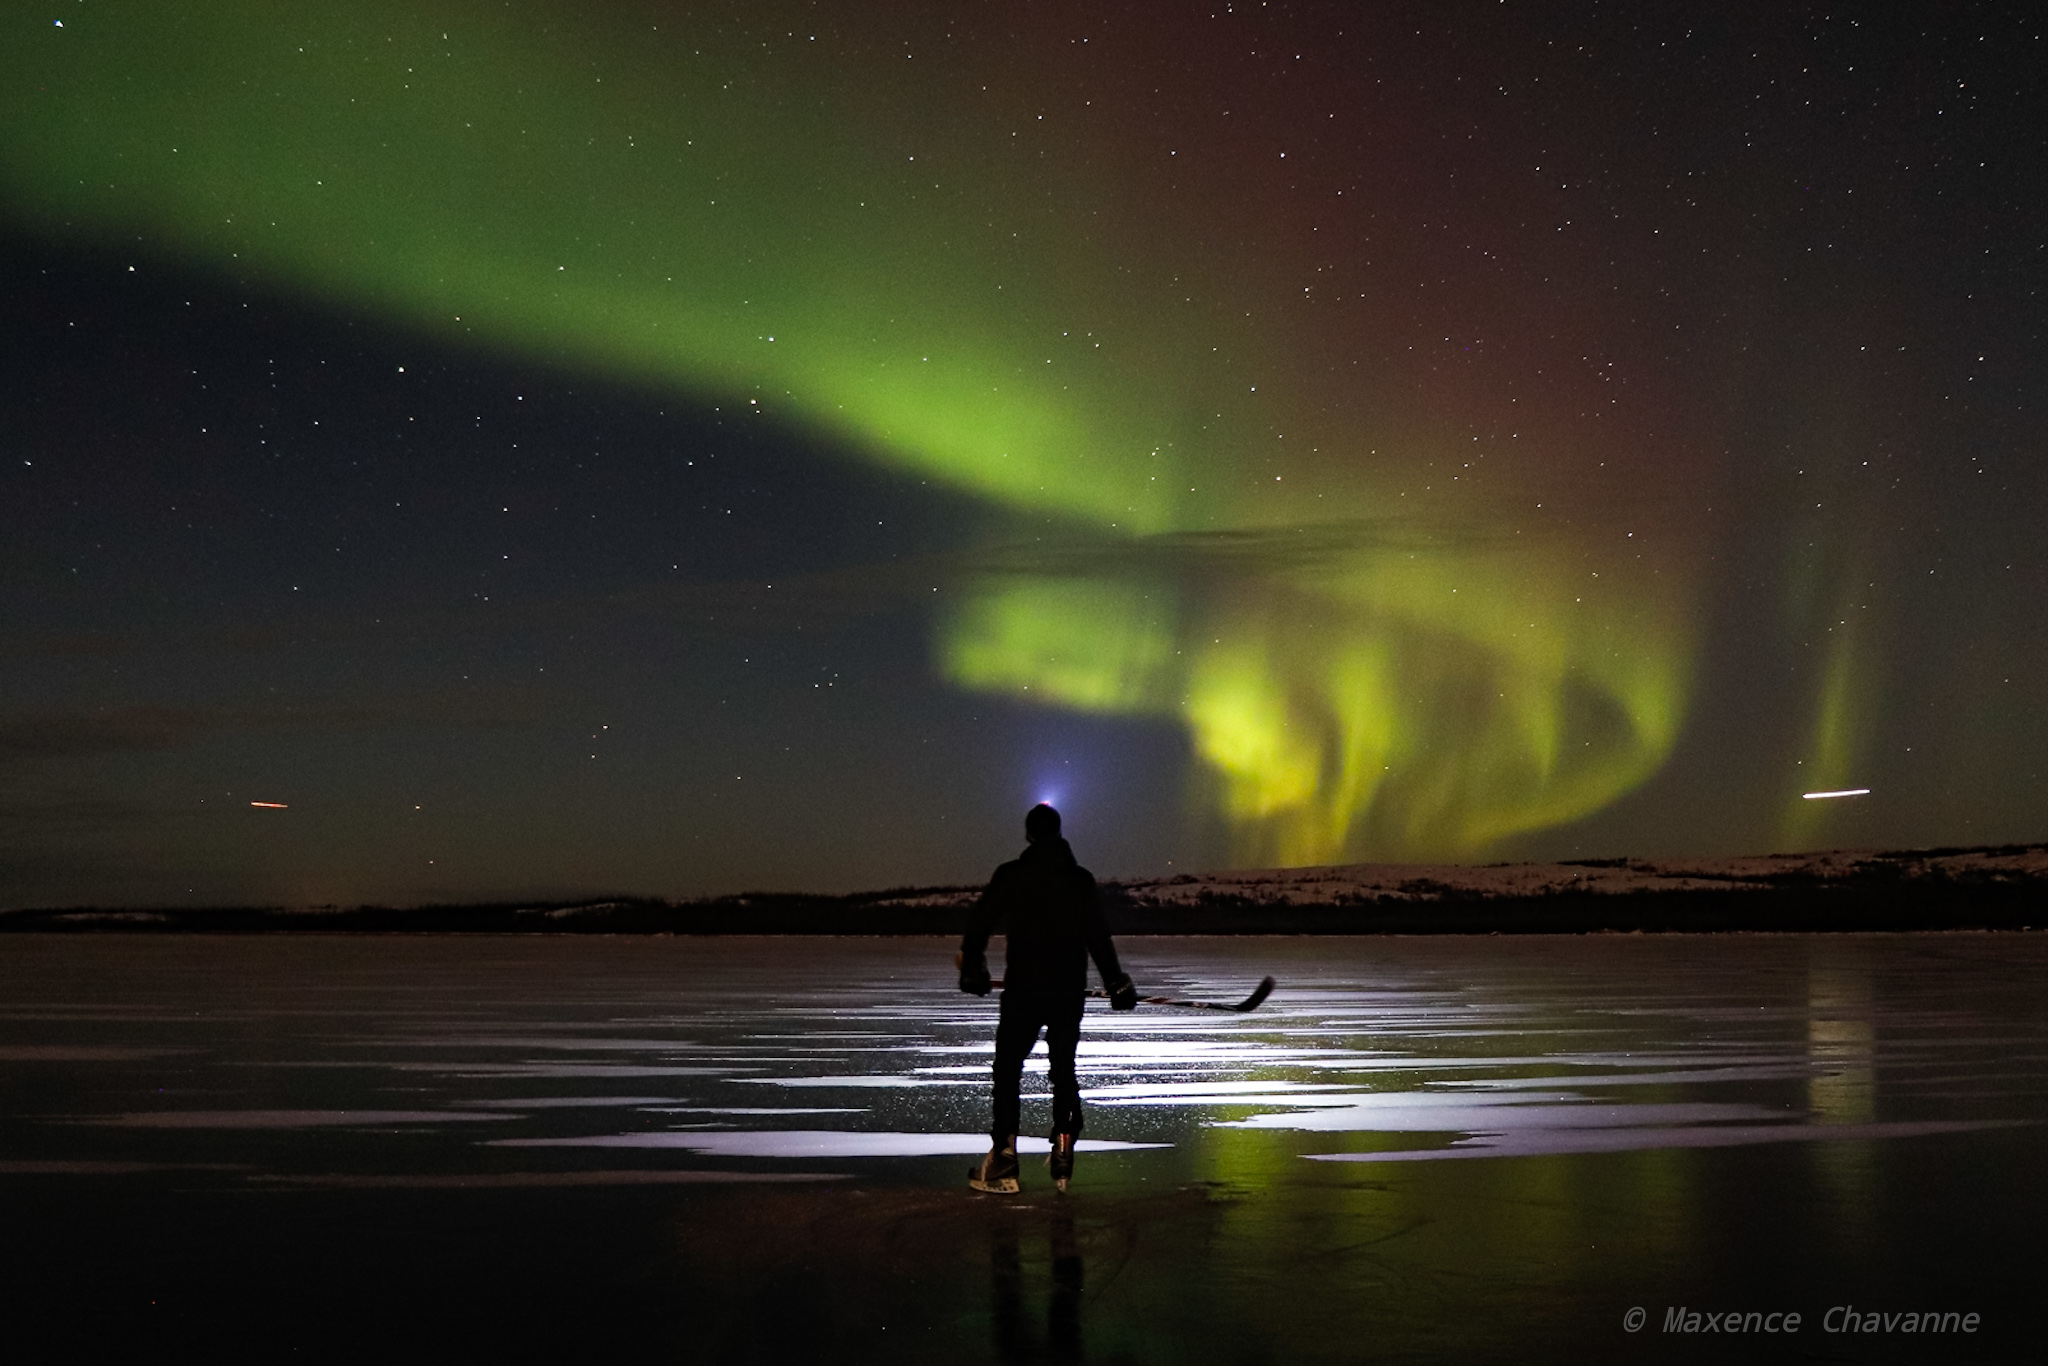 The northern lights glow above a hockey player on a frozen Stewart Lake by Kuujjuaq on Nov. 11. (Photo by Maxence Chavanne)